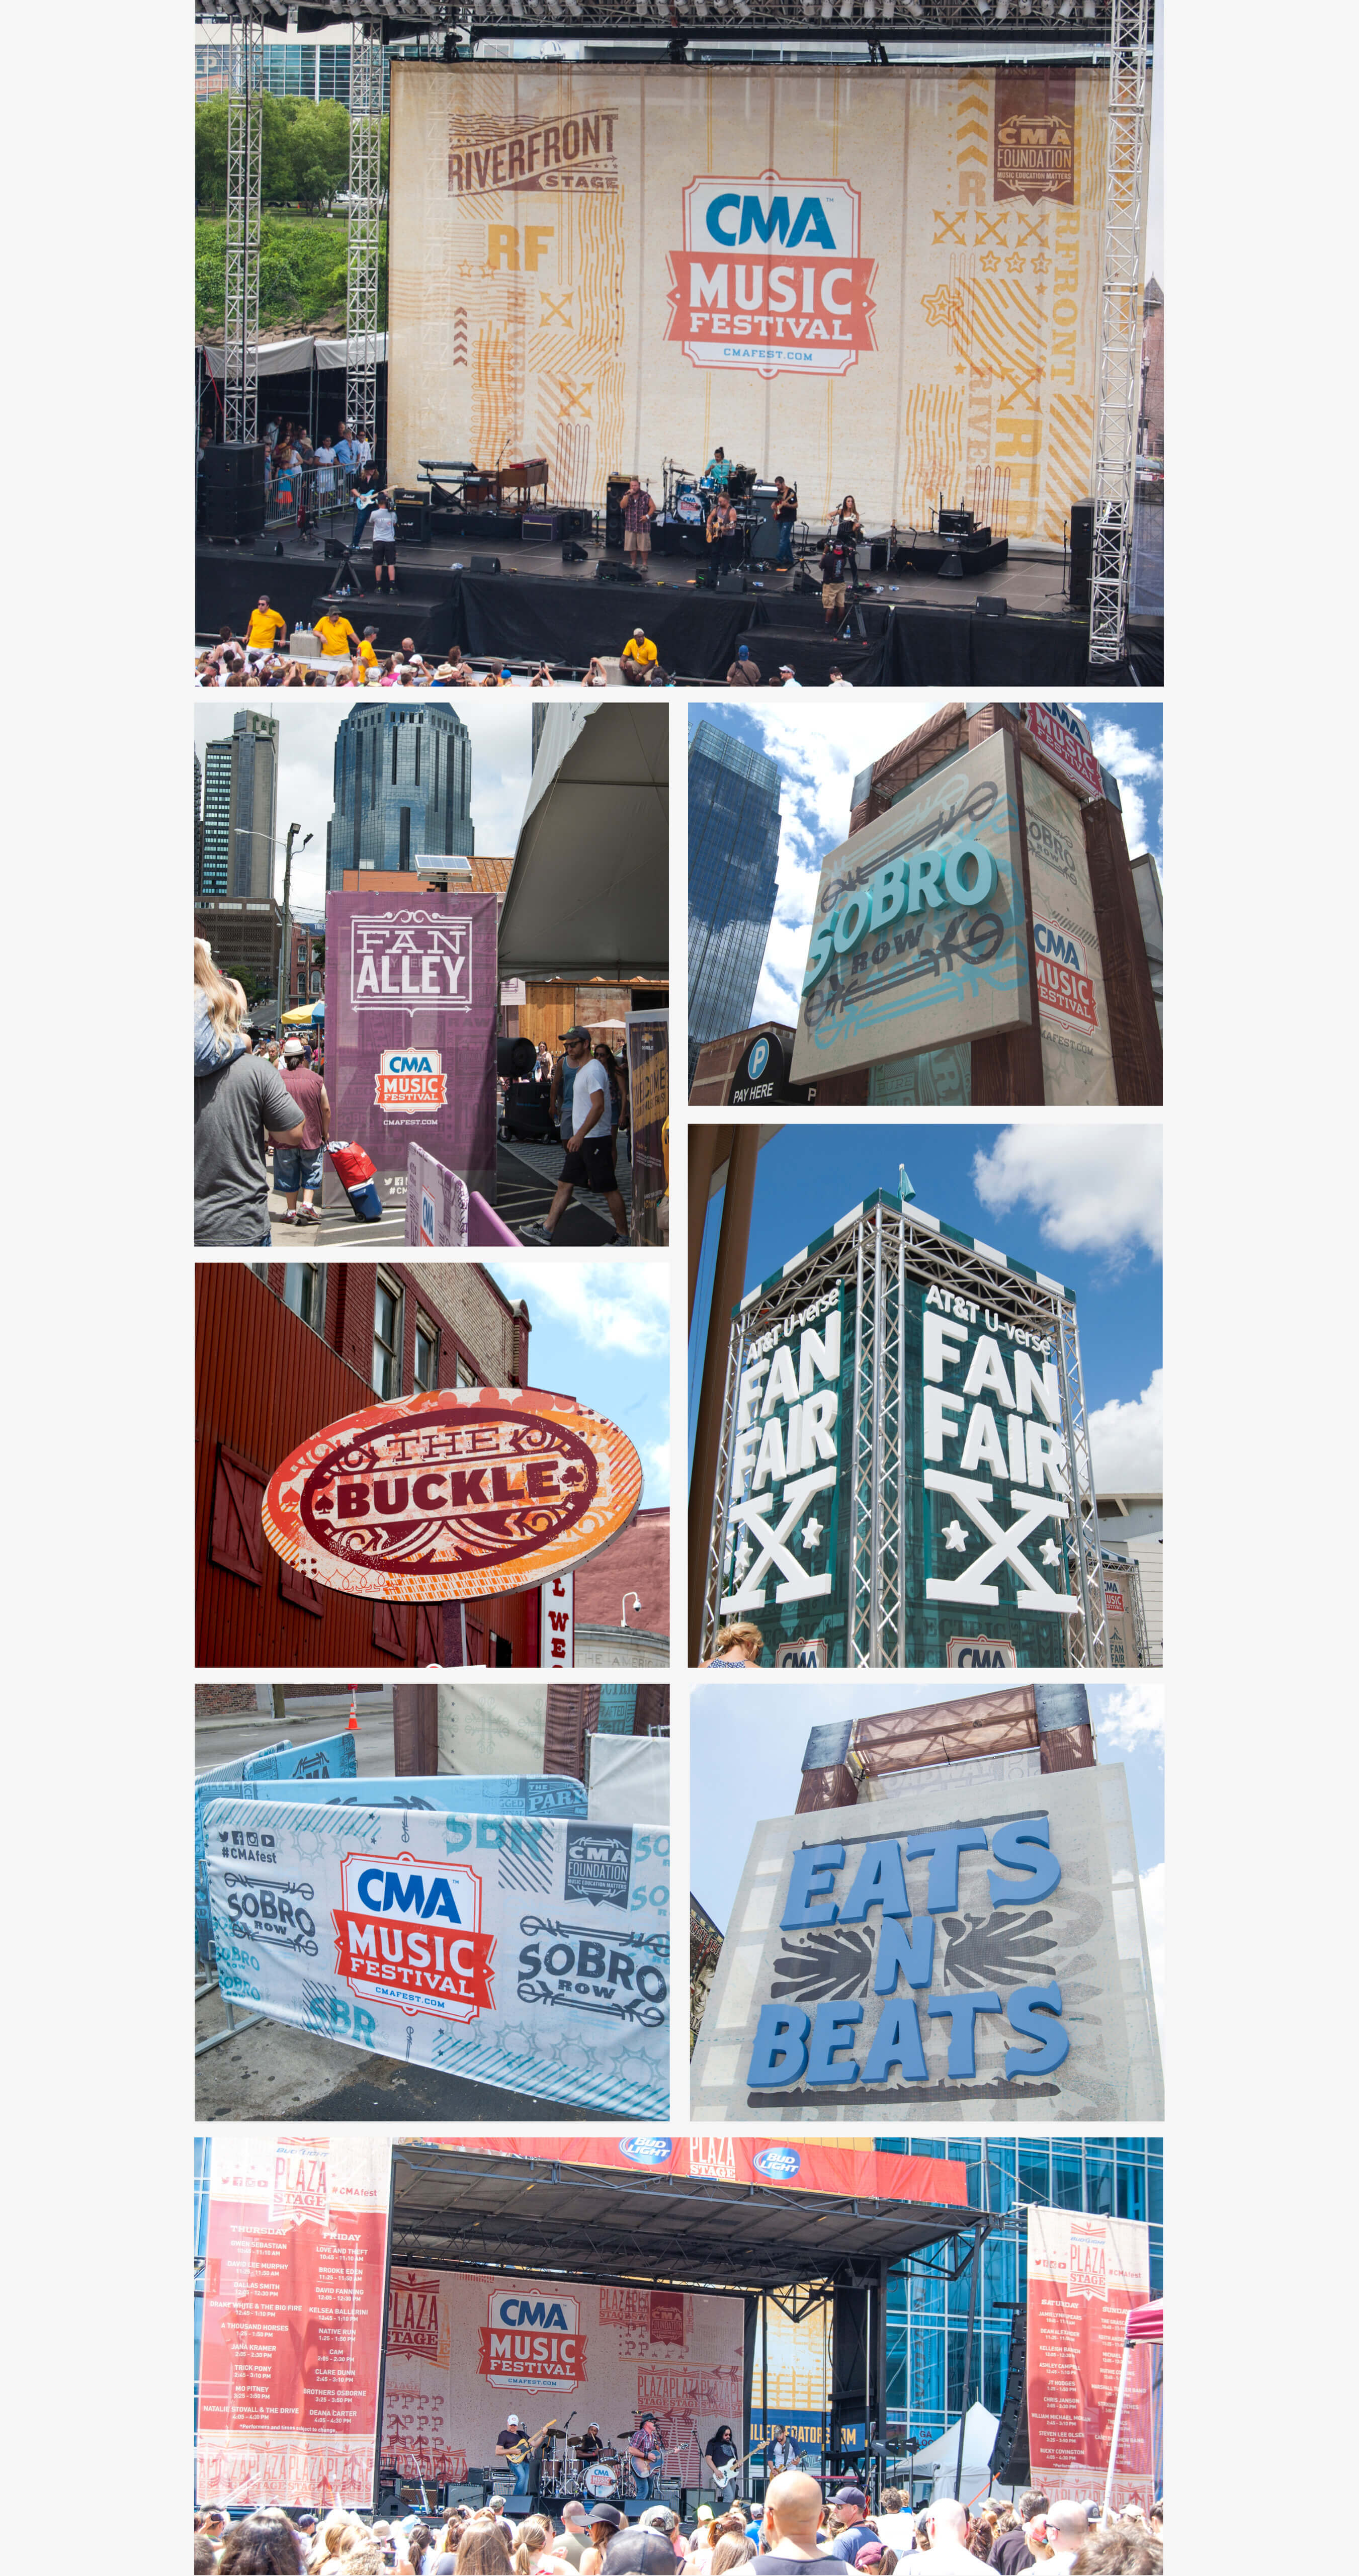 Photos of Riverfront Stage backdrop, Fan Alley signage, SoBro Row sign and bike rack, The Buckle sign, AT&T U-verse Fan Fair X sign, Eats N Beats sign and Plaza Stage backdrop and banners for CMA Music Festival in Nashville, Tennesee